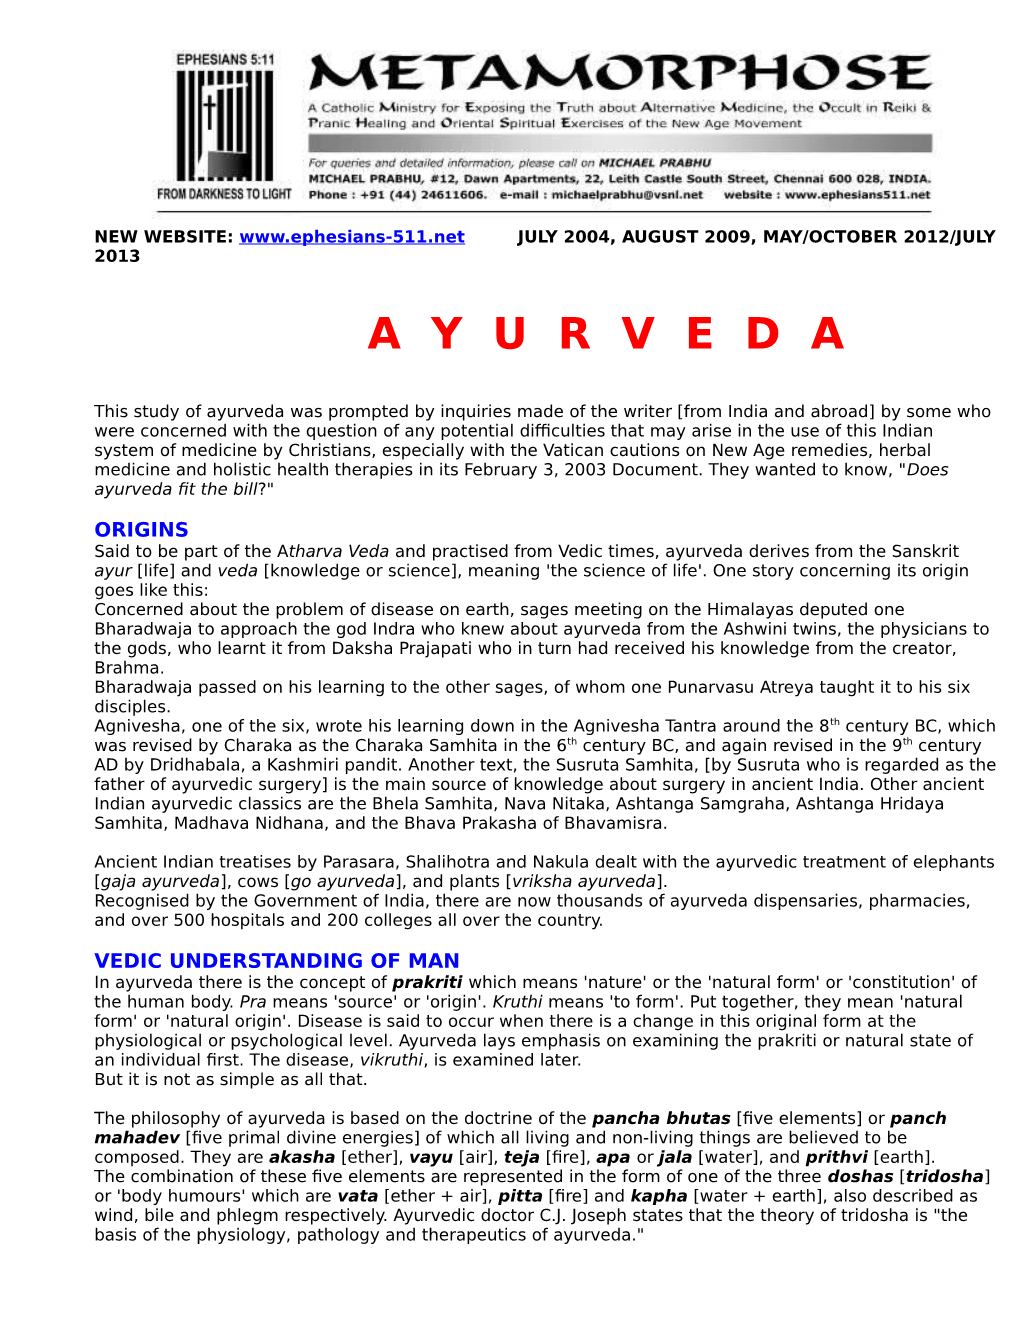 Ayurveda Derives from the Sanskrit Ayus [Longevity of Life] and Veda